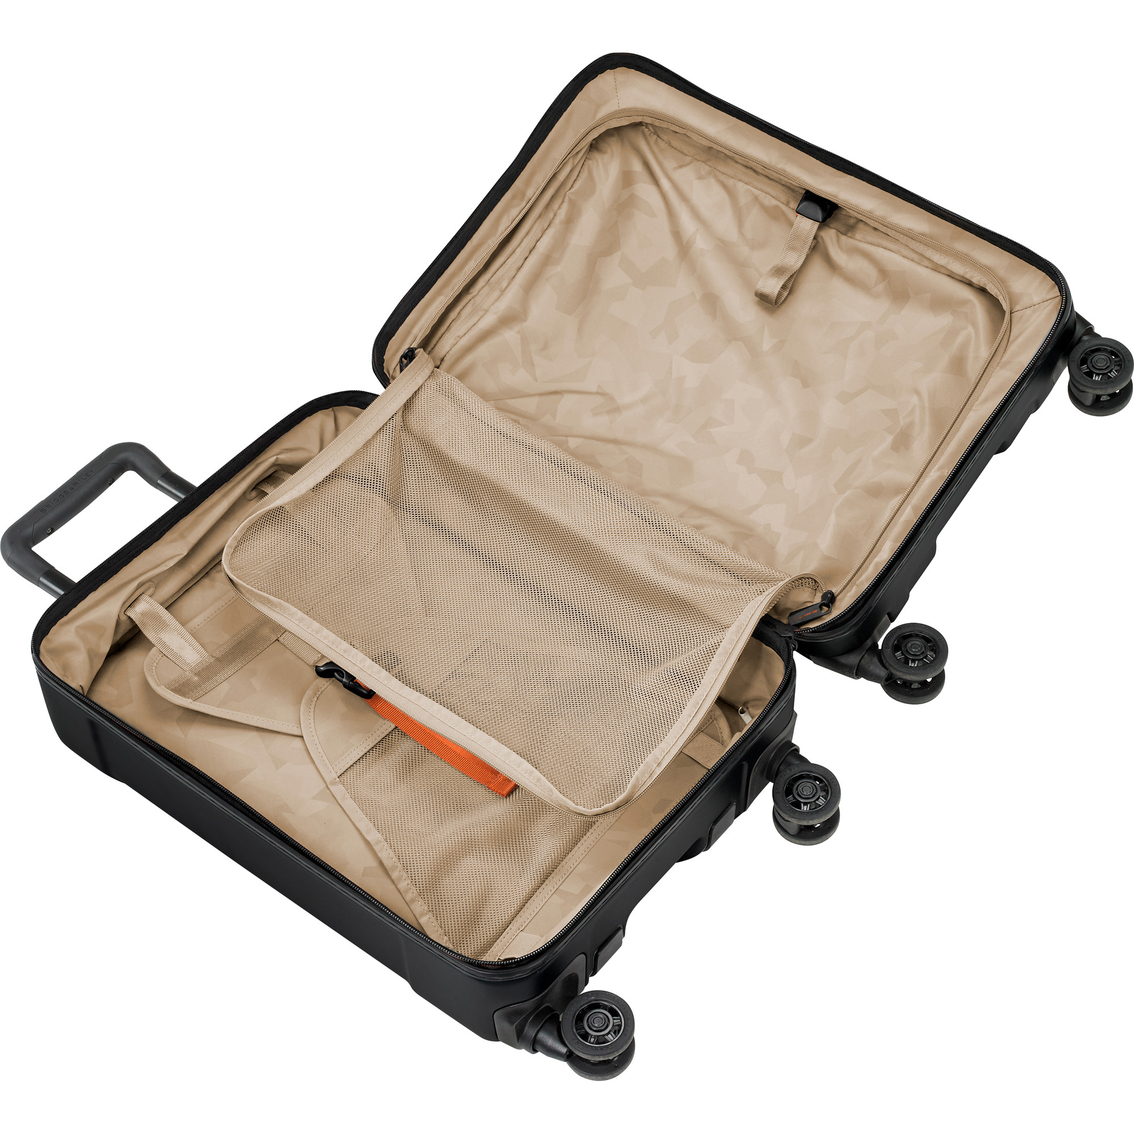 Briggs & Riley International Torq 21 in. Stealth Carry-On Spinner - Image 9 of 10